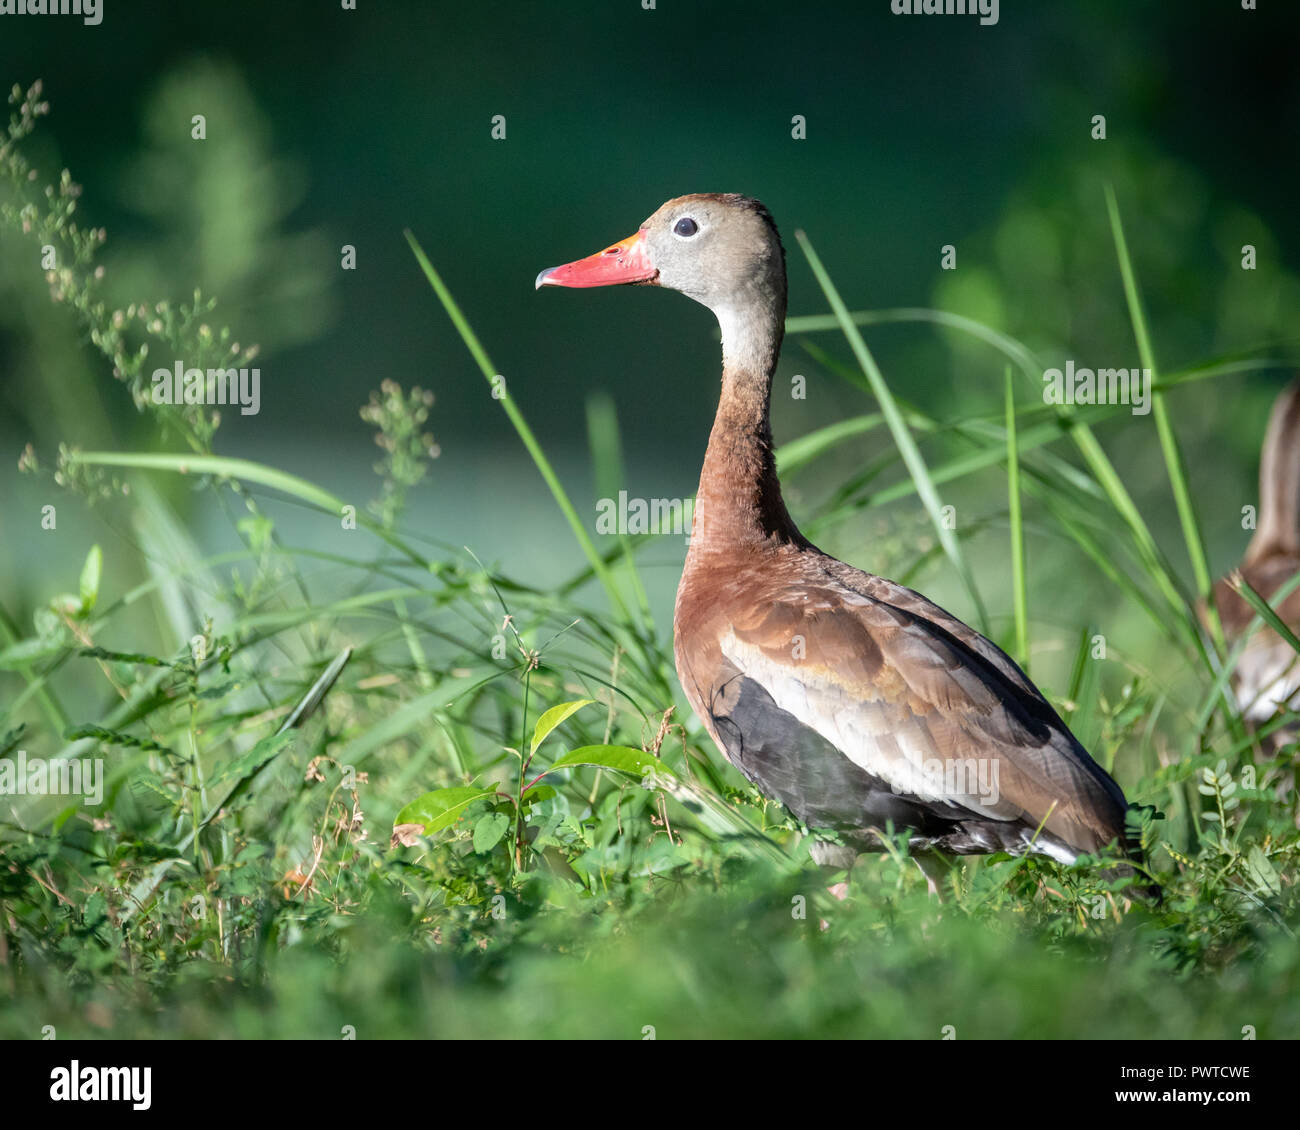 A beautiful Black-bellied Whistling Duck (Dendrocygna autumnalis) sits in tall grass. Stock Photo